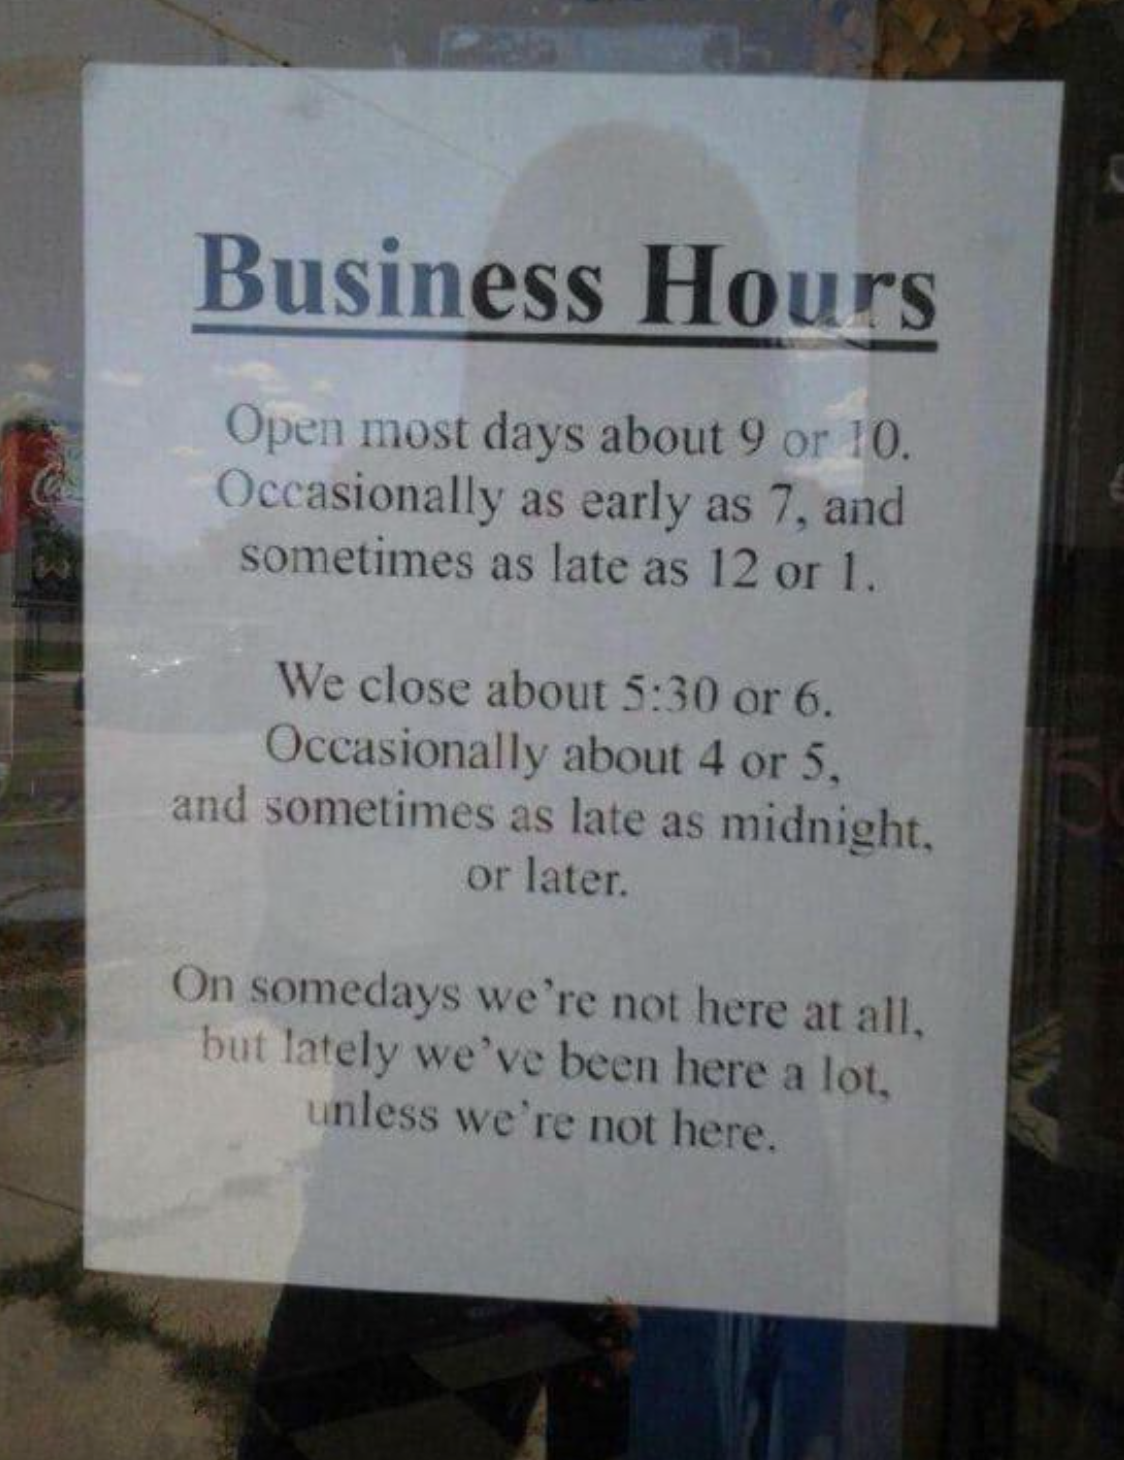 Sign with humorous business hours, mentioning varied opening and closing times, admitting inconsistency